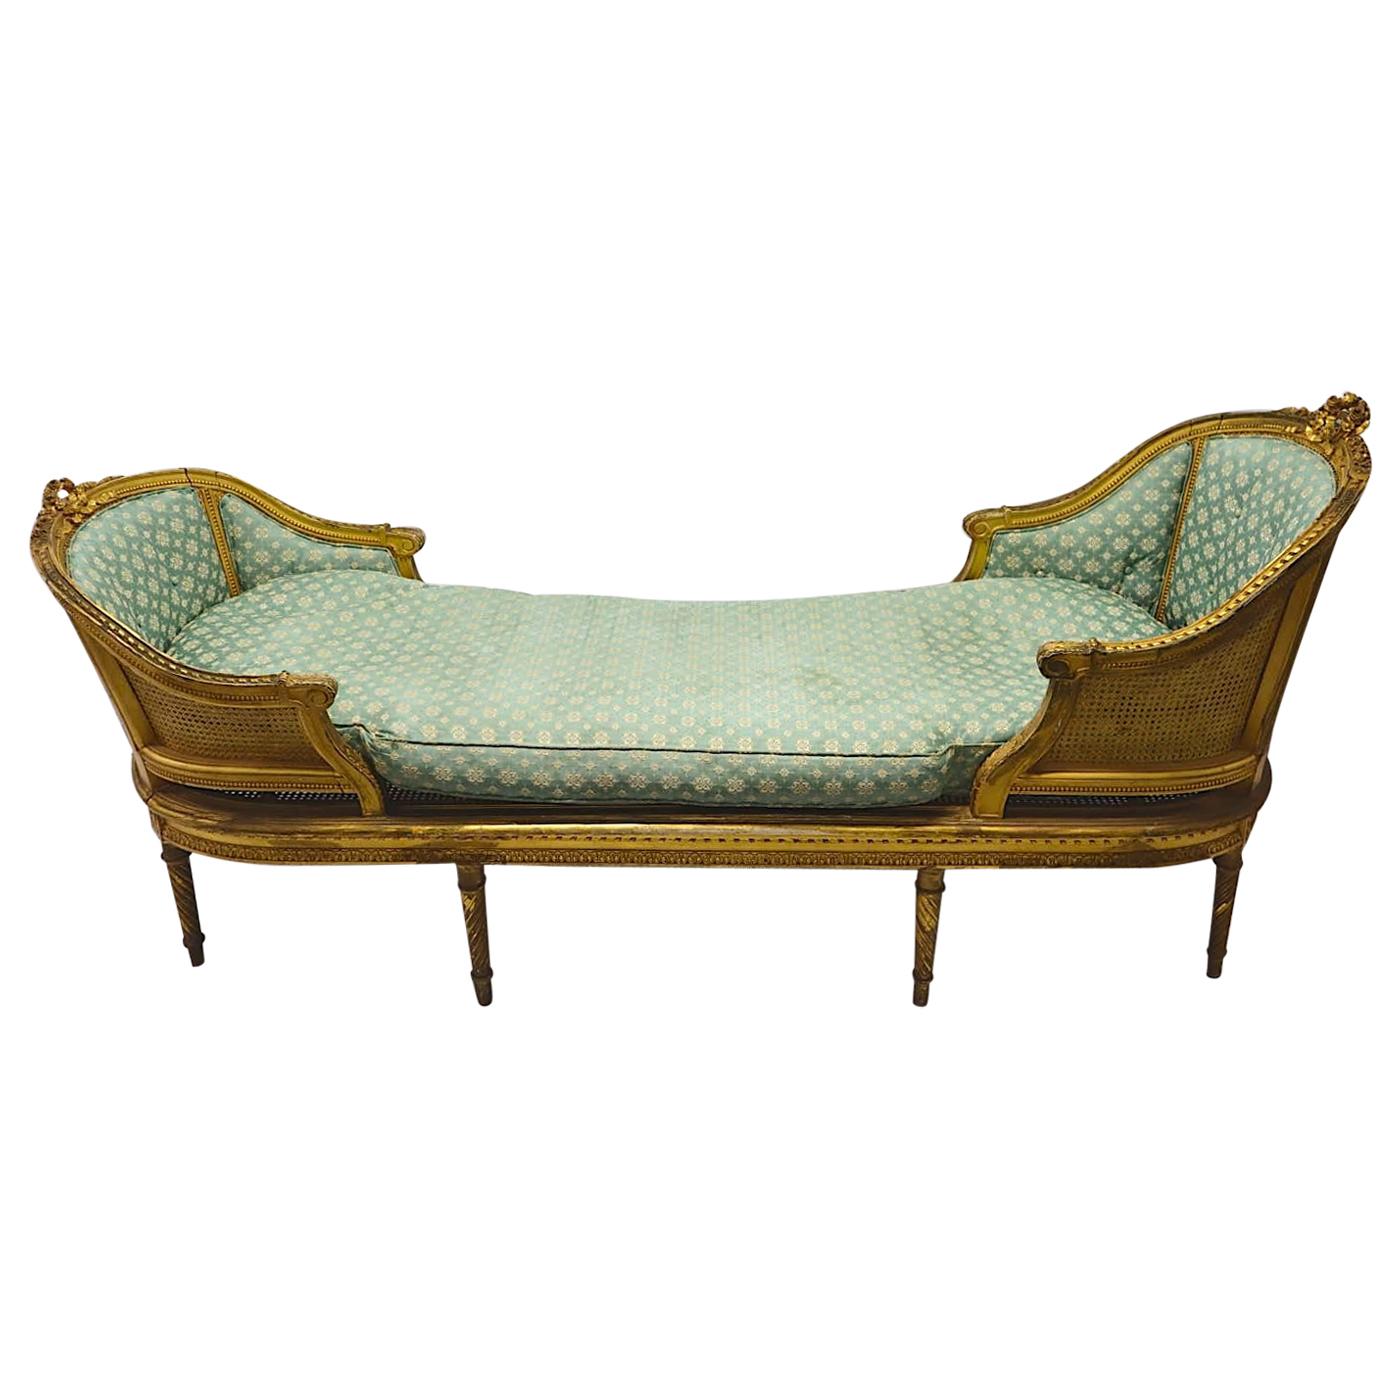 French Luxurious Chaise Longue, circa Mid-18th Century, Louis XIV Style